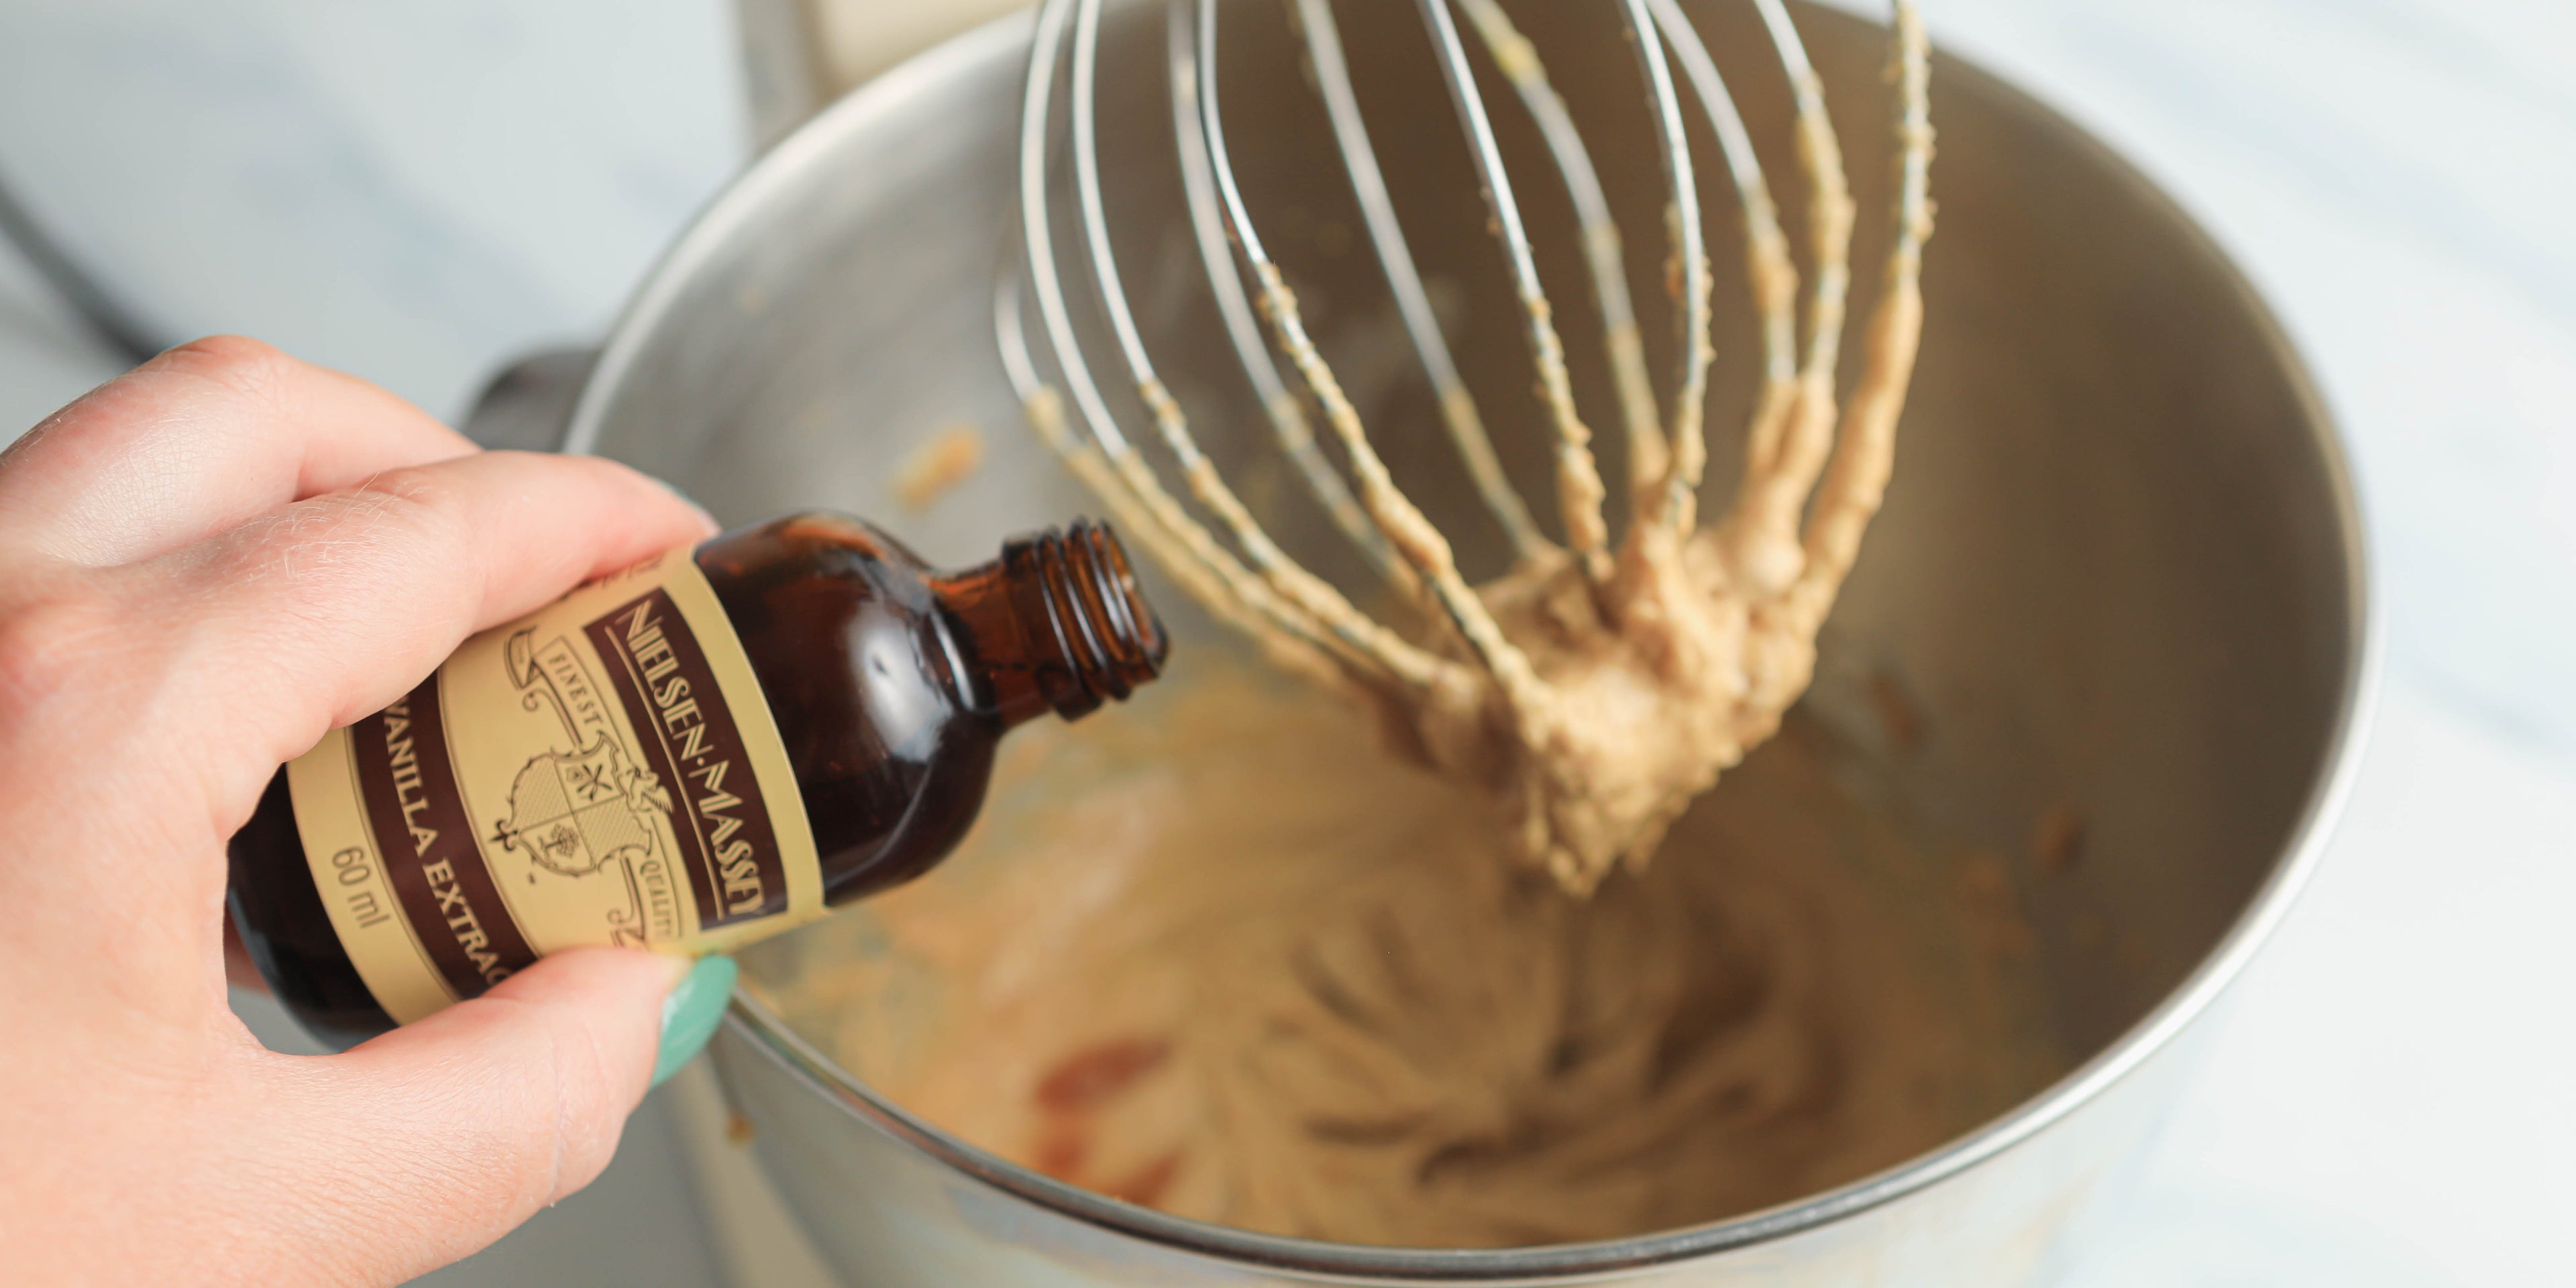 Hand pouring in vanilla extract to a cake mixer blending cookie mix